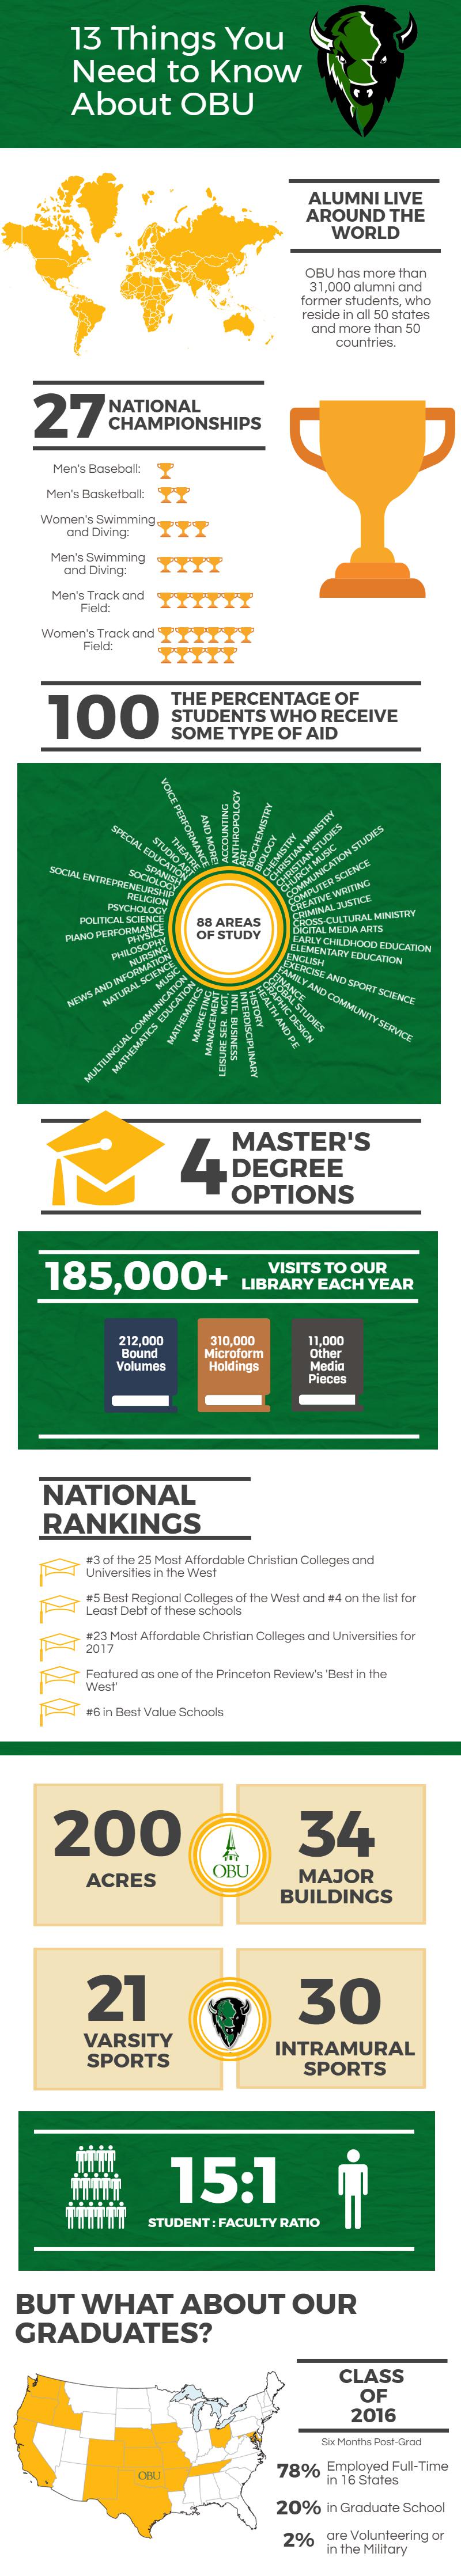 13 Things You Need to Know About OBU [Infographic] | Oklahoma Baptist ...